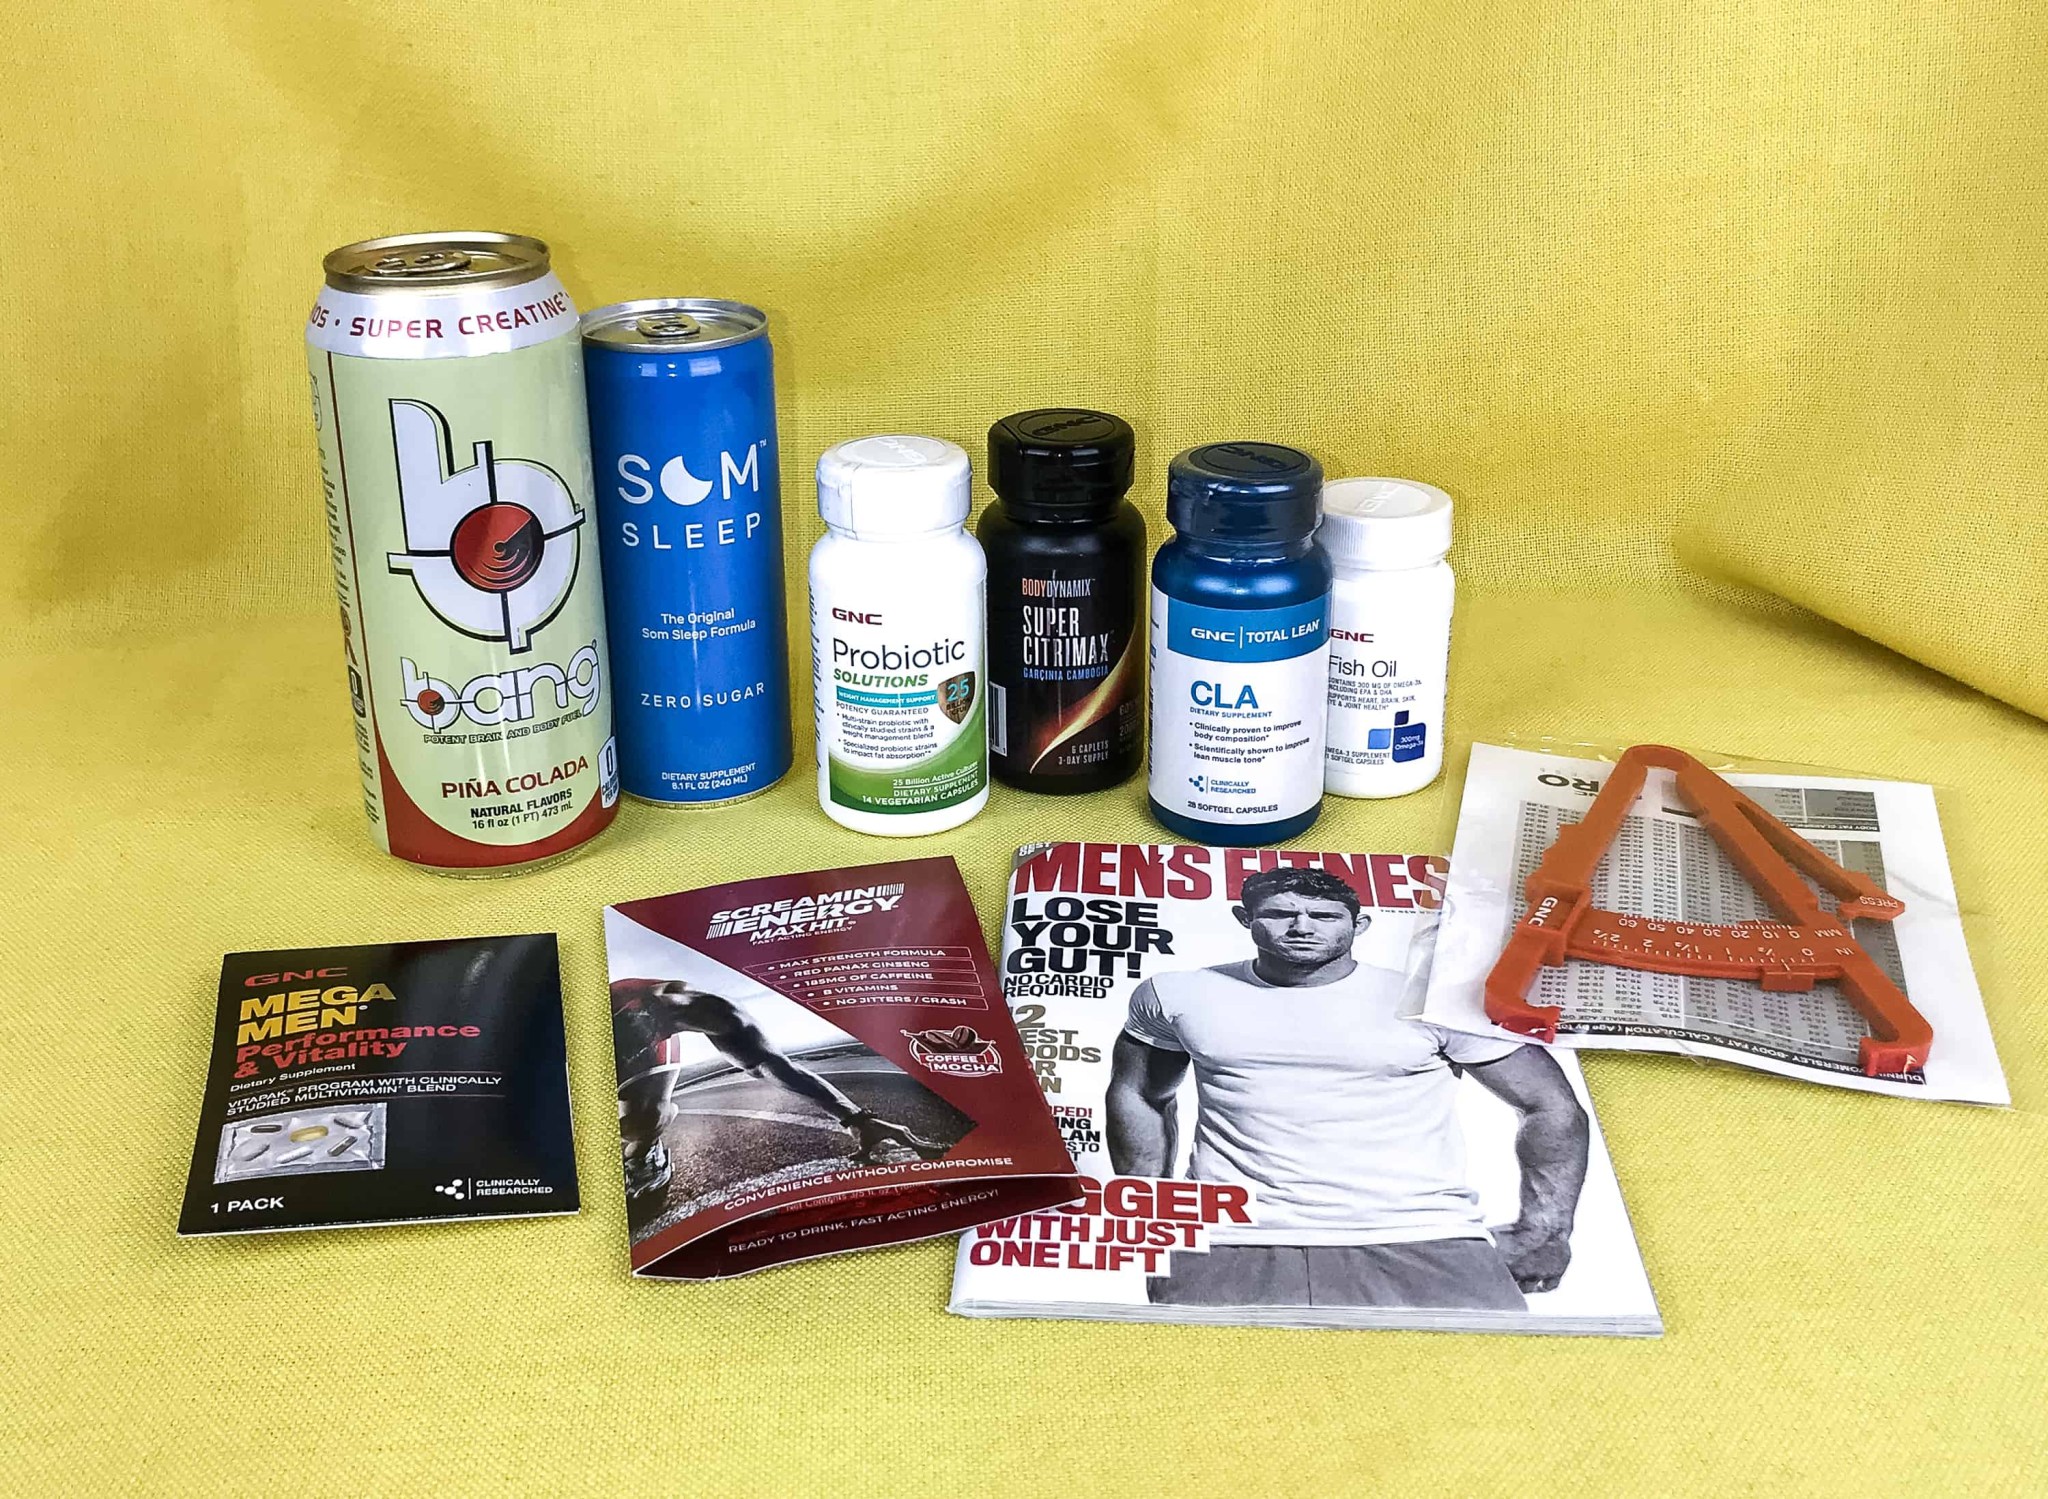 My GNC Pro Box Reviews Get All The Details At Hello Subscription!